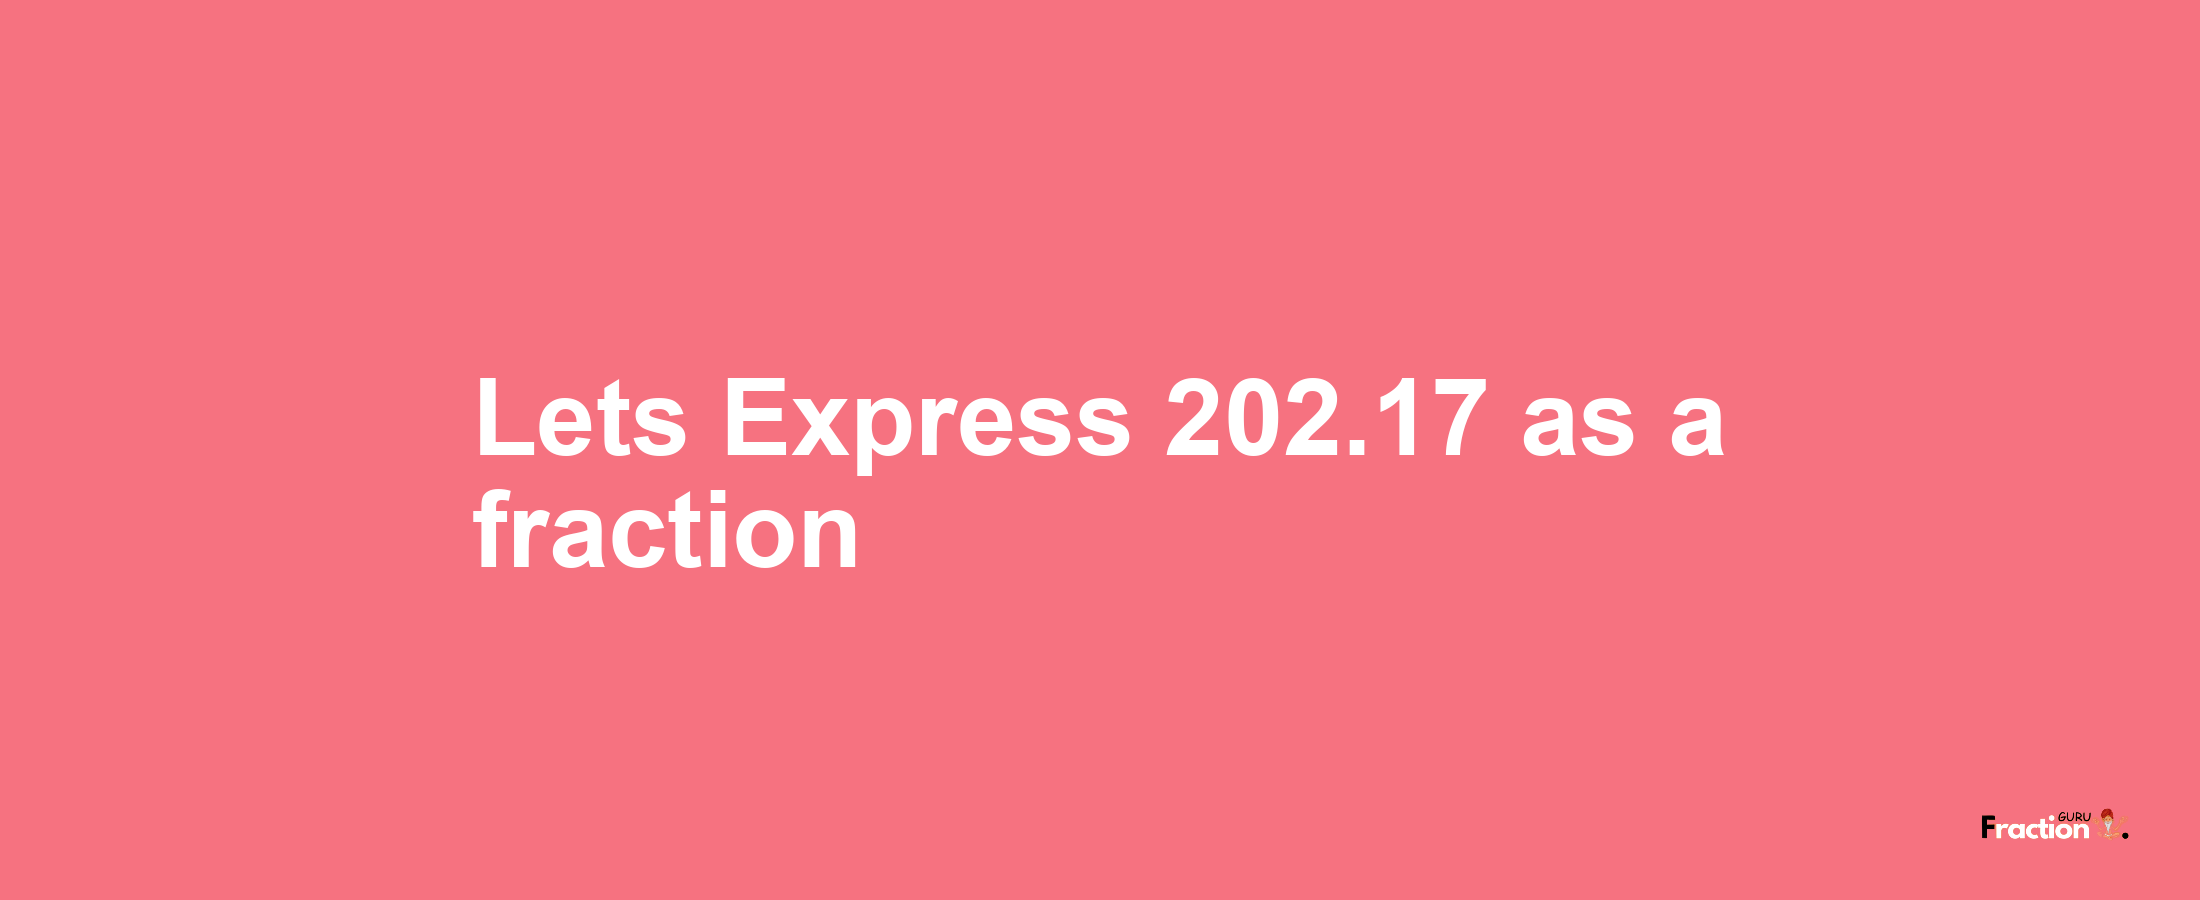 Lets Express 202.17 as afraction